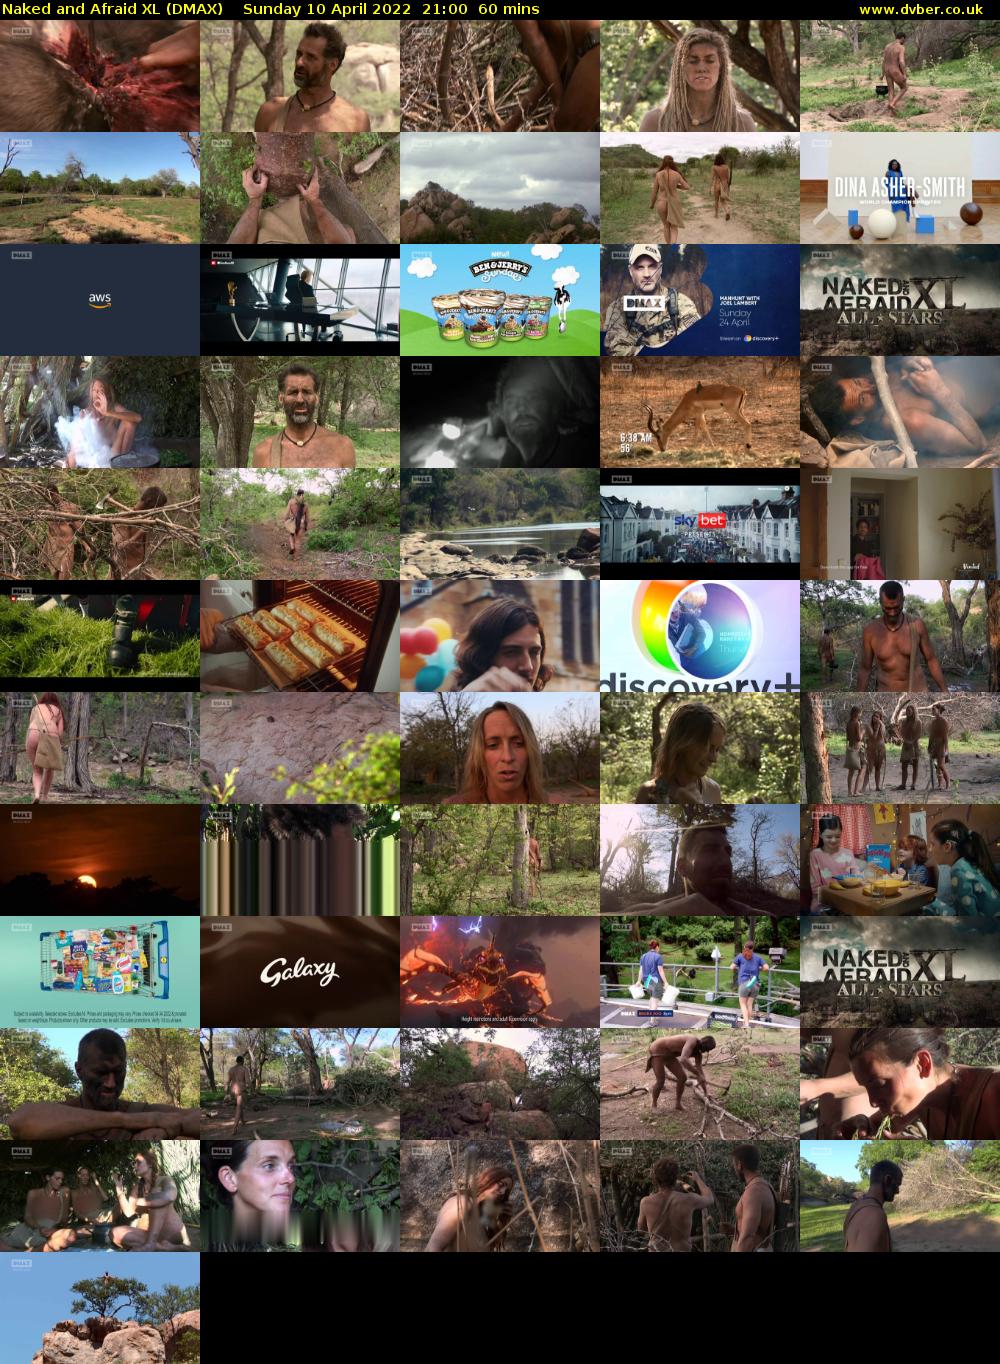 Naked and Afraid XL (DMAX) Sunday 10 April 2022 21:00 - 22:00